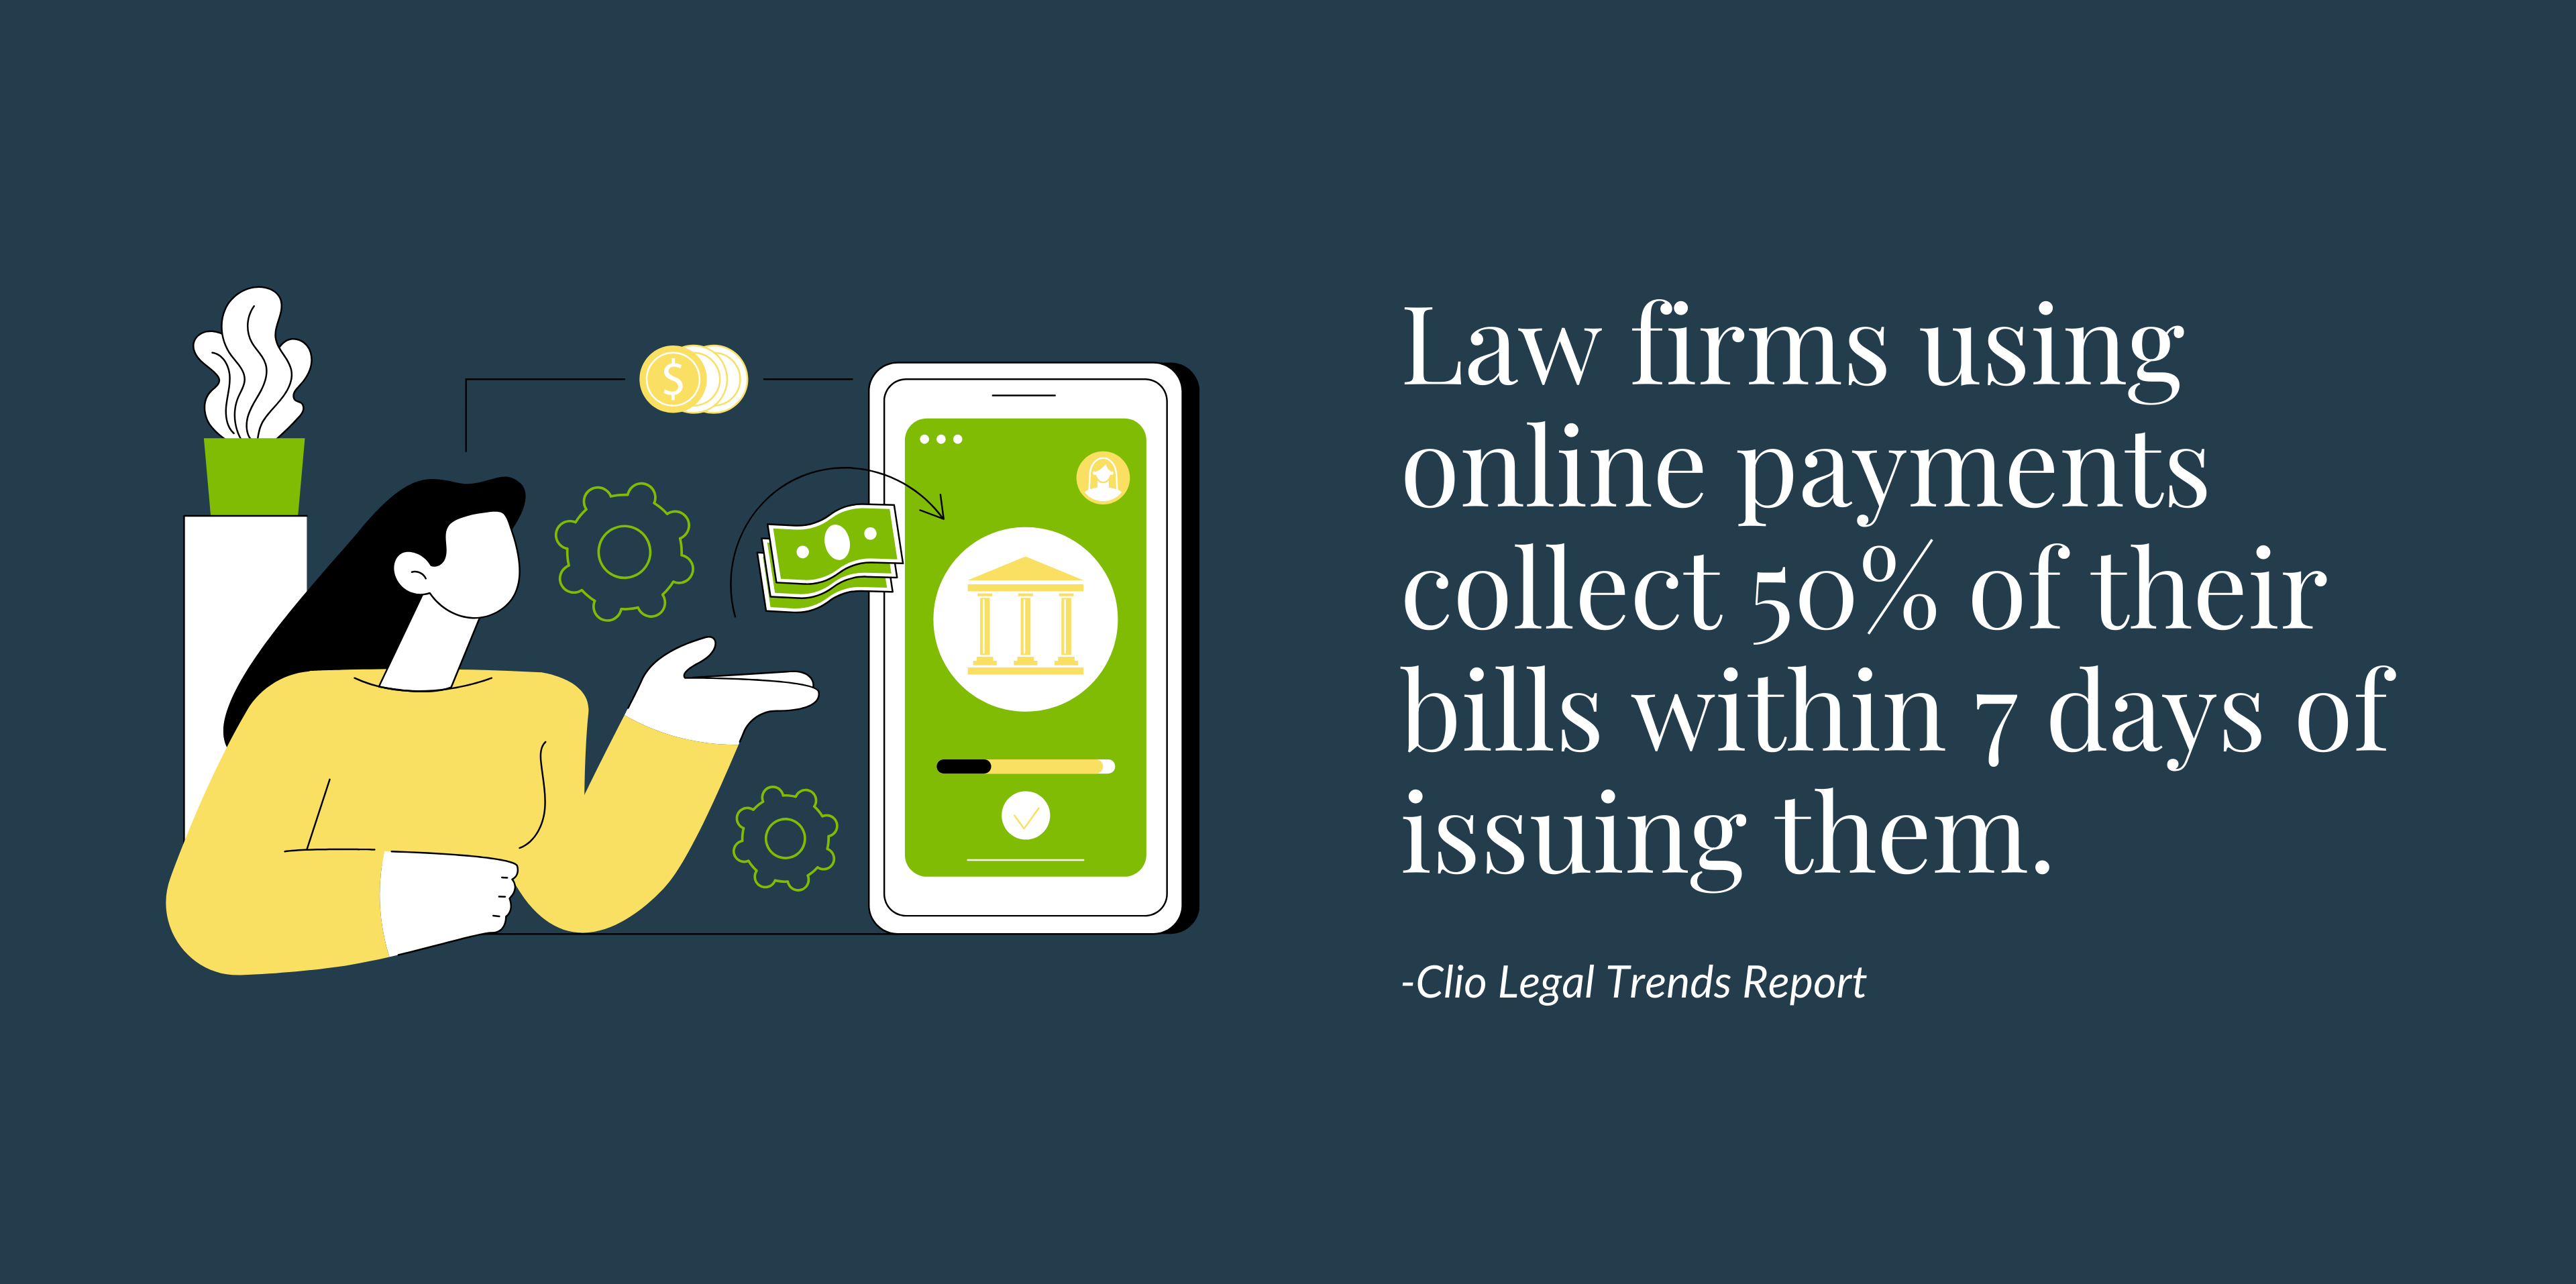 Text: "Law firms using online payments collect 50% of their bills within 7 days of issuing them"